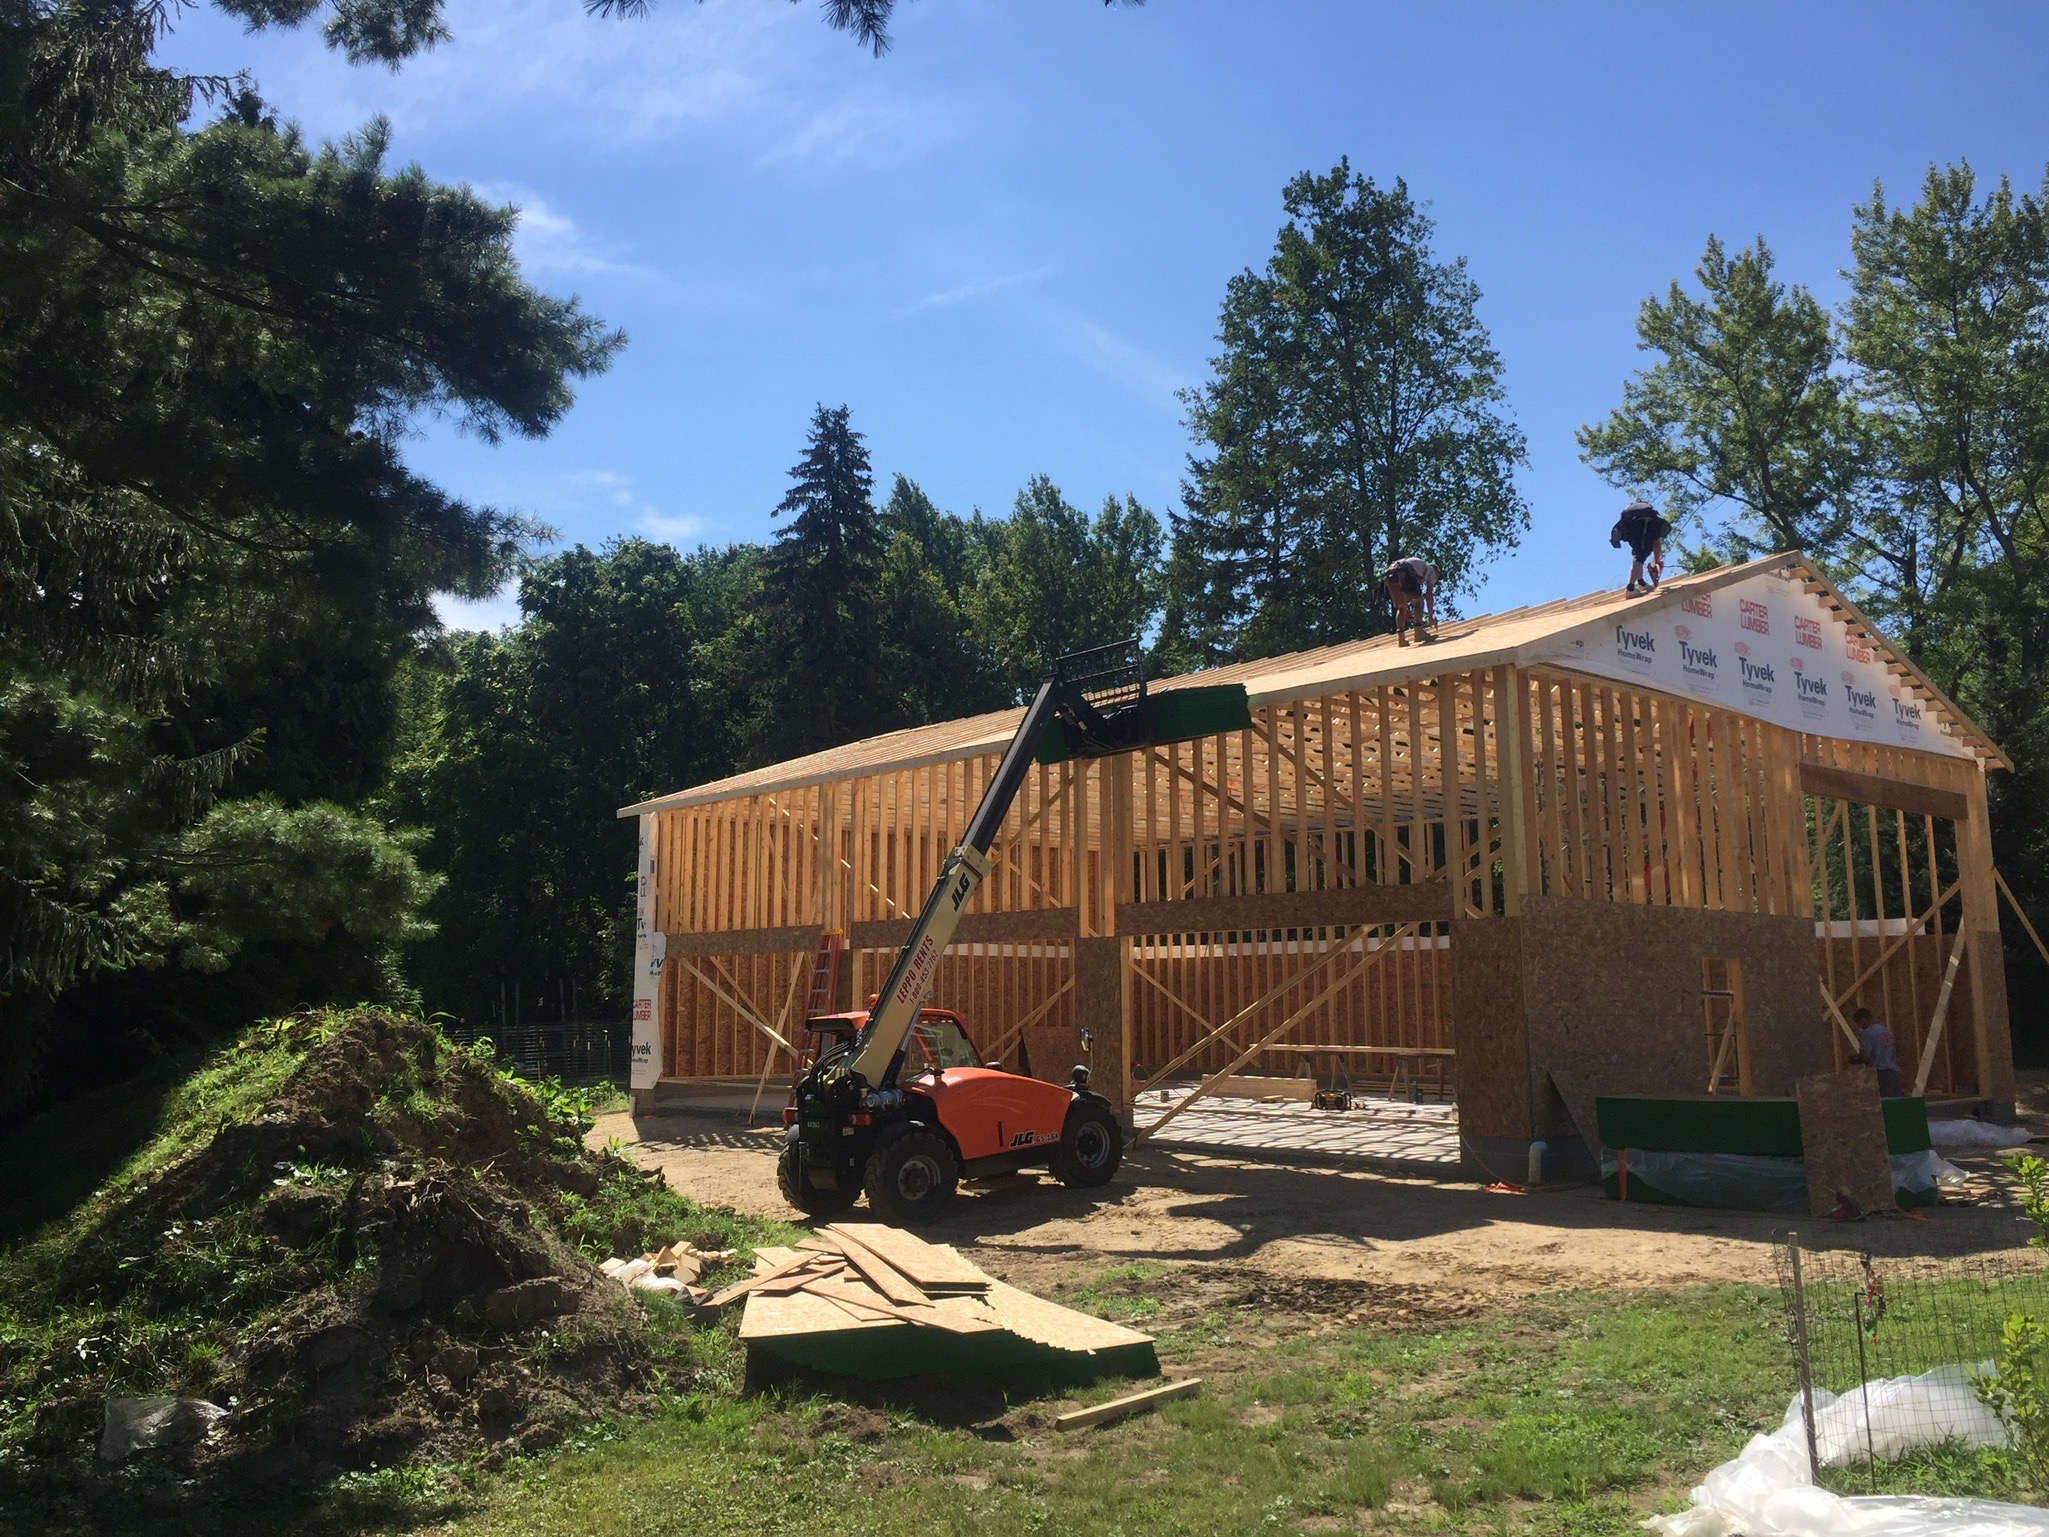 Pole barn constuction by Deckmaster